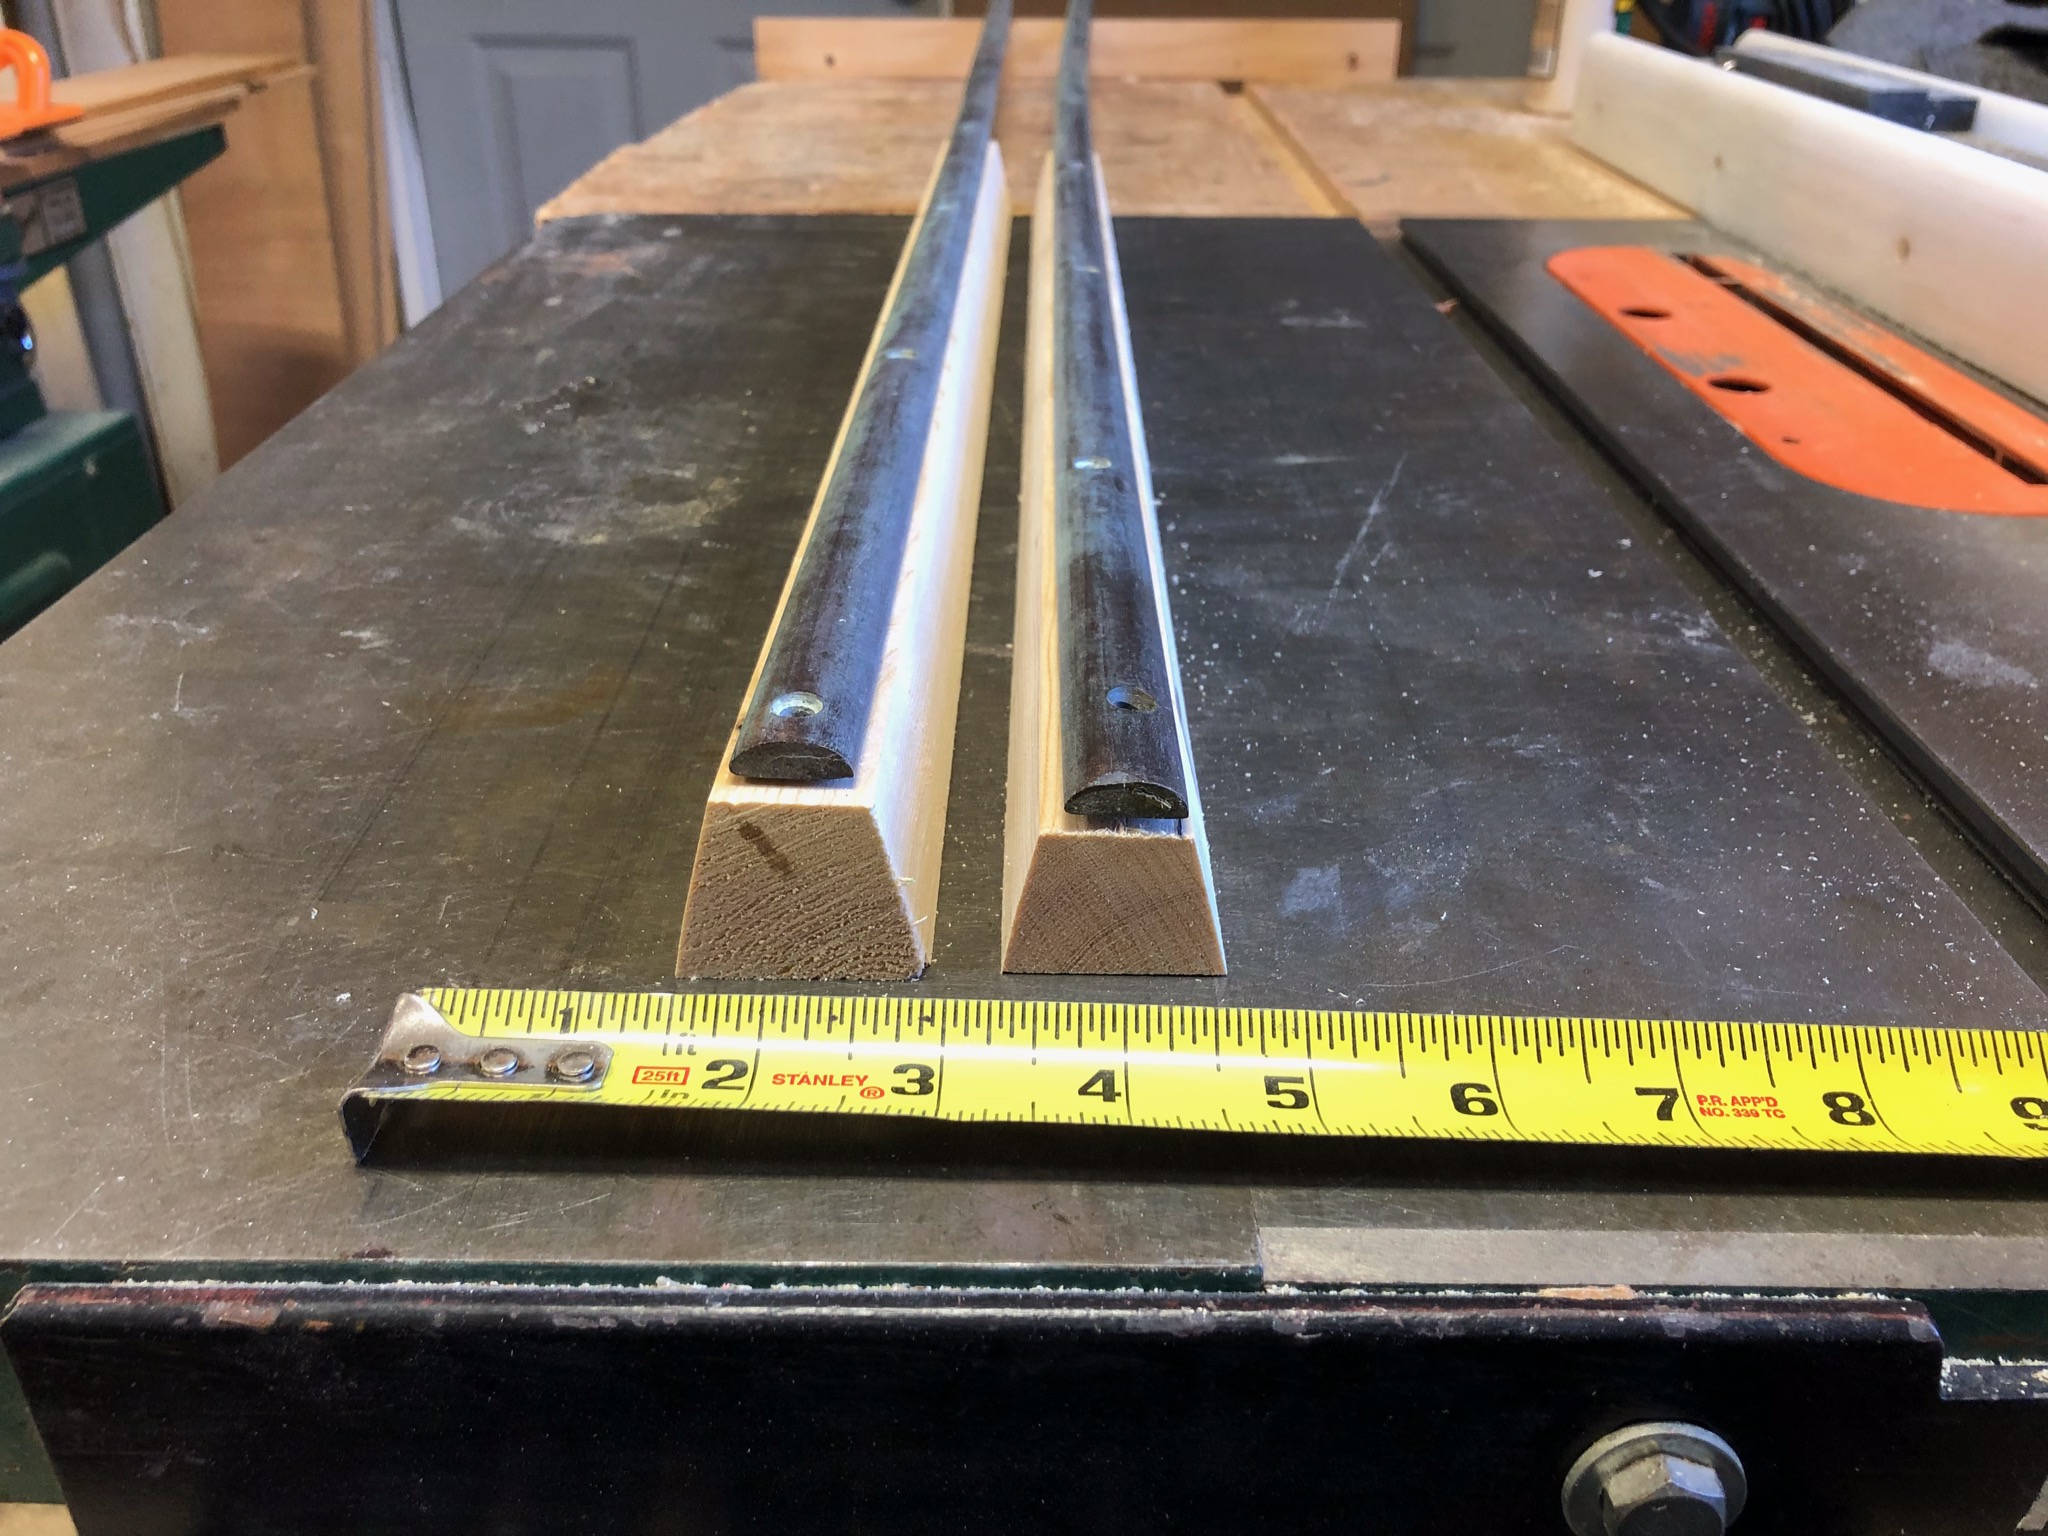 Two profiles. 1.25” high on left, 1” high on right.